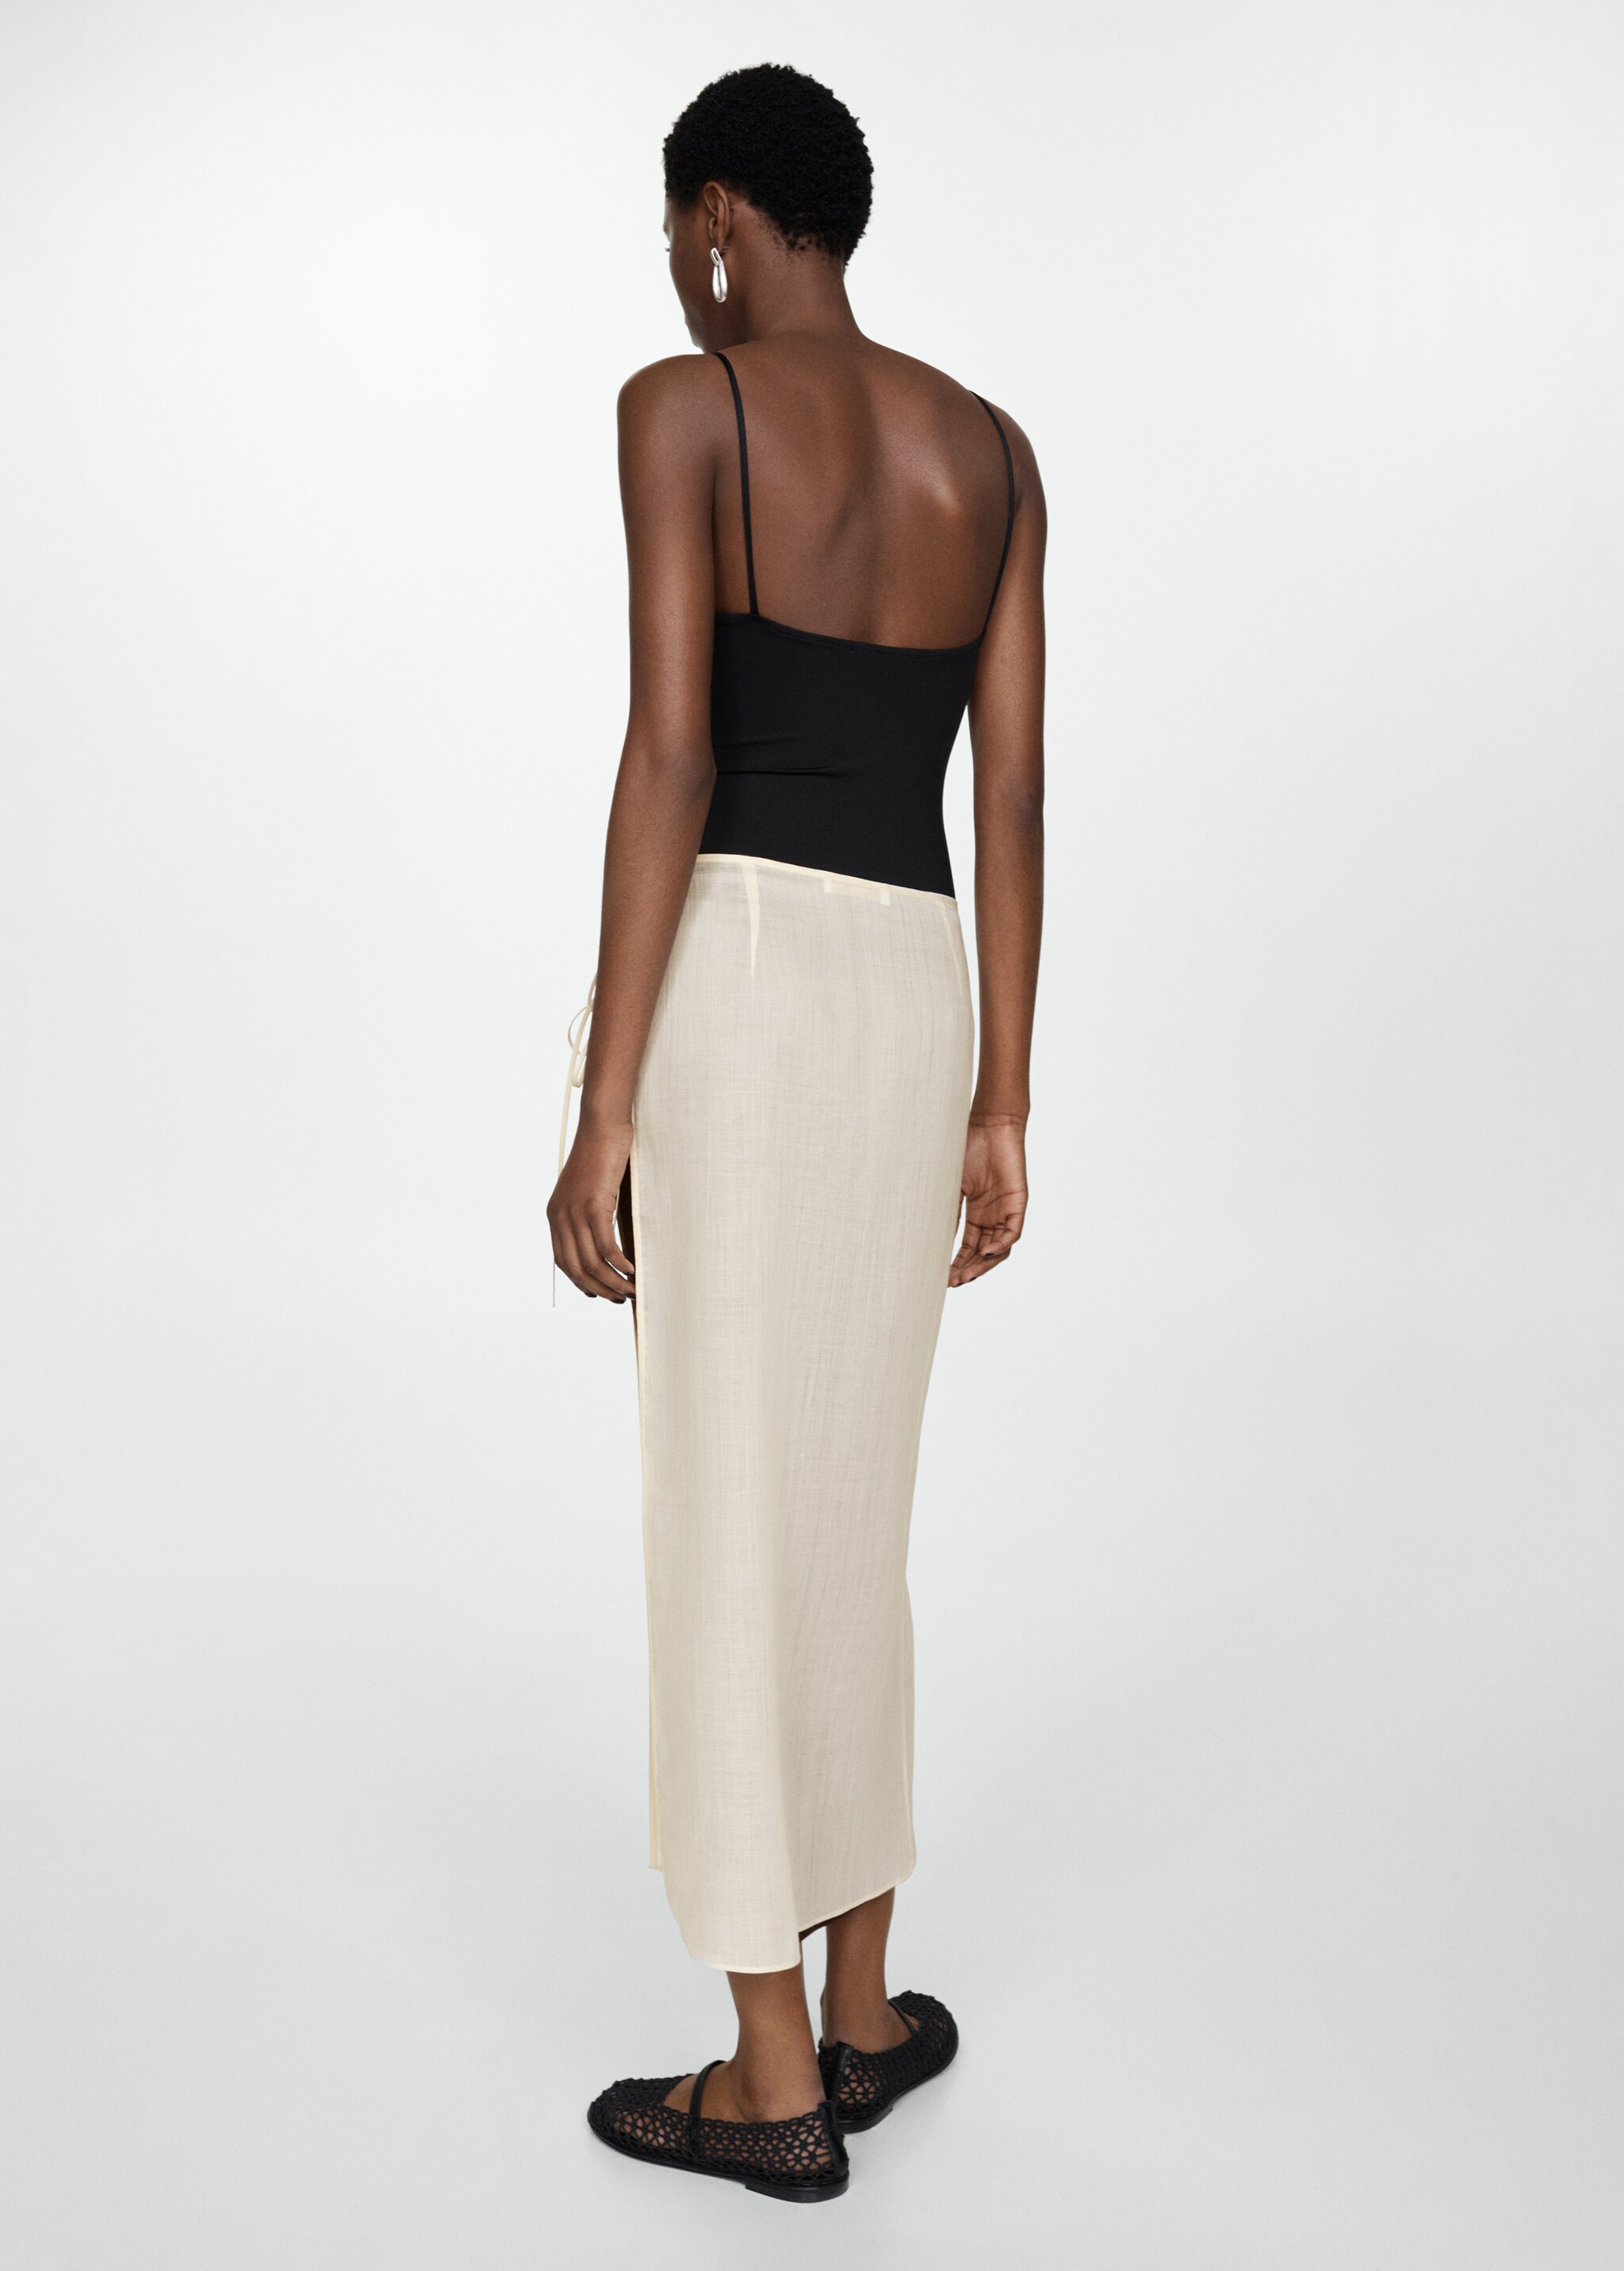 Ramio pareo skirt with slit - Reverse of the article